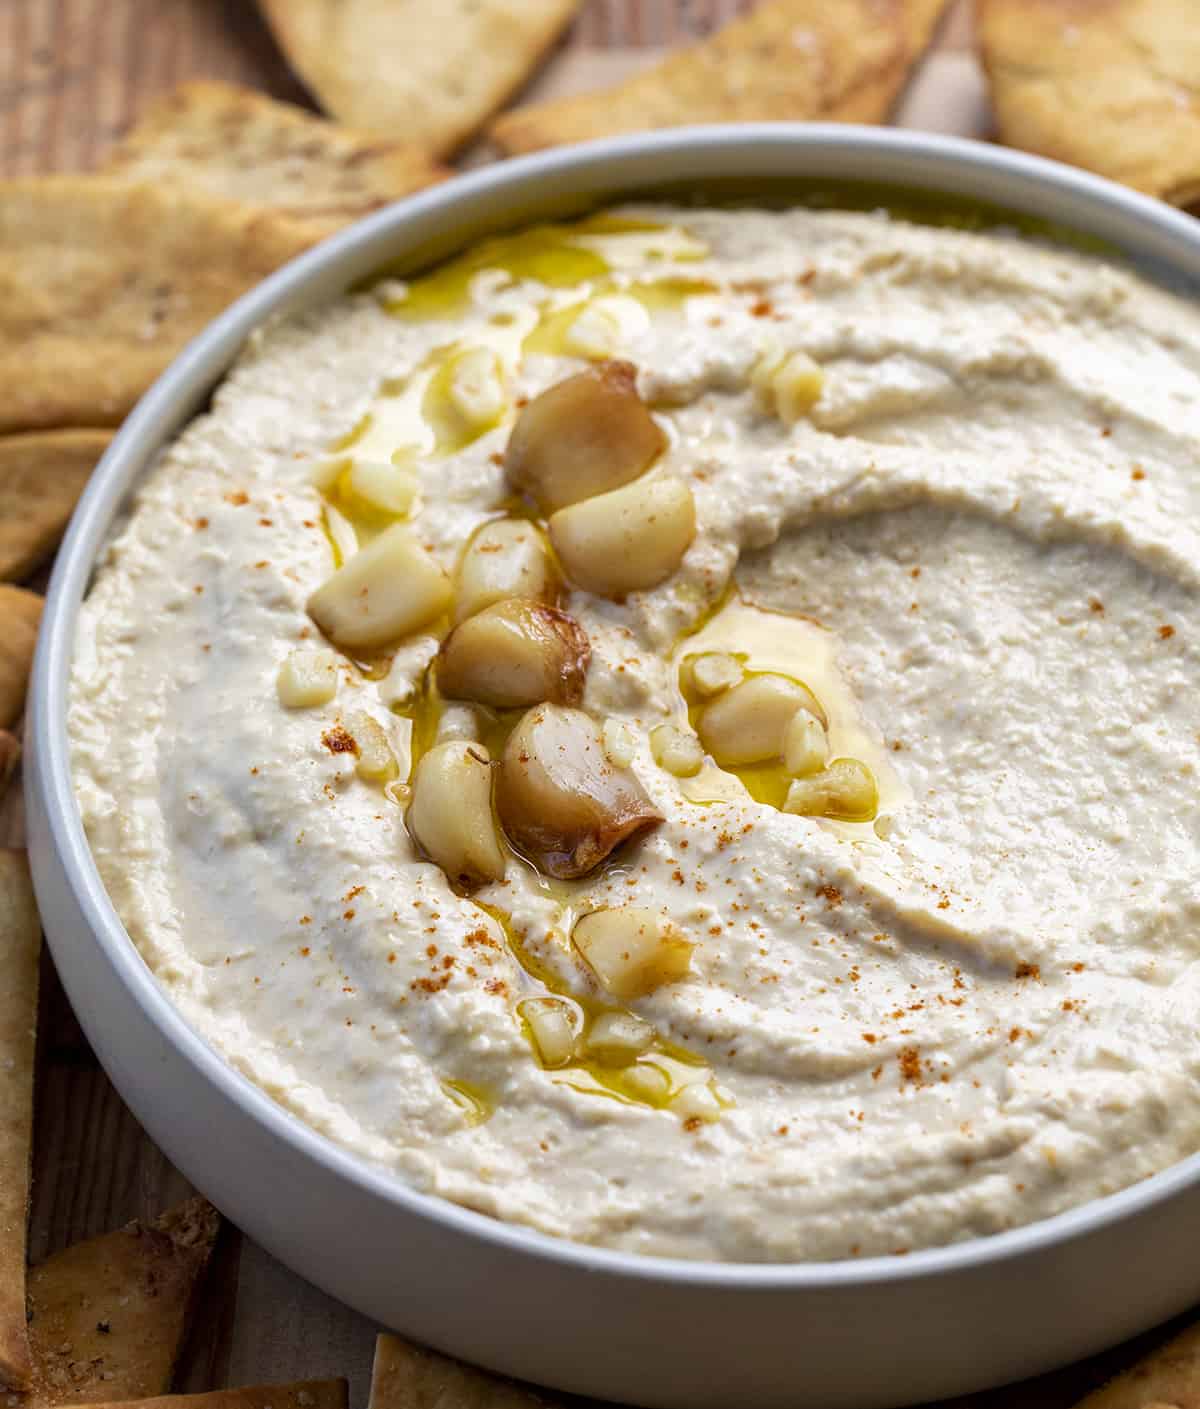 Bowl of Roasted Garlic Hummus with Roasted Garlic Cloves on Top. Hummus, Hummus Recipes, How to Make Creamy Hummus, Ice Cubes in Hummus, Appetizer, What to Eat with Hummus, recipes, i am homesteader, iamhomesteader